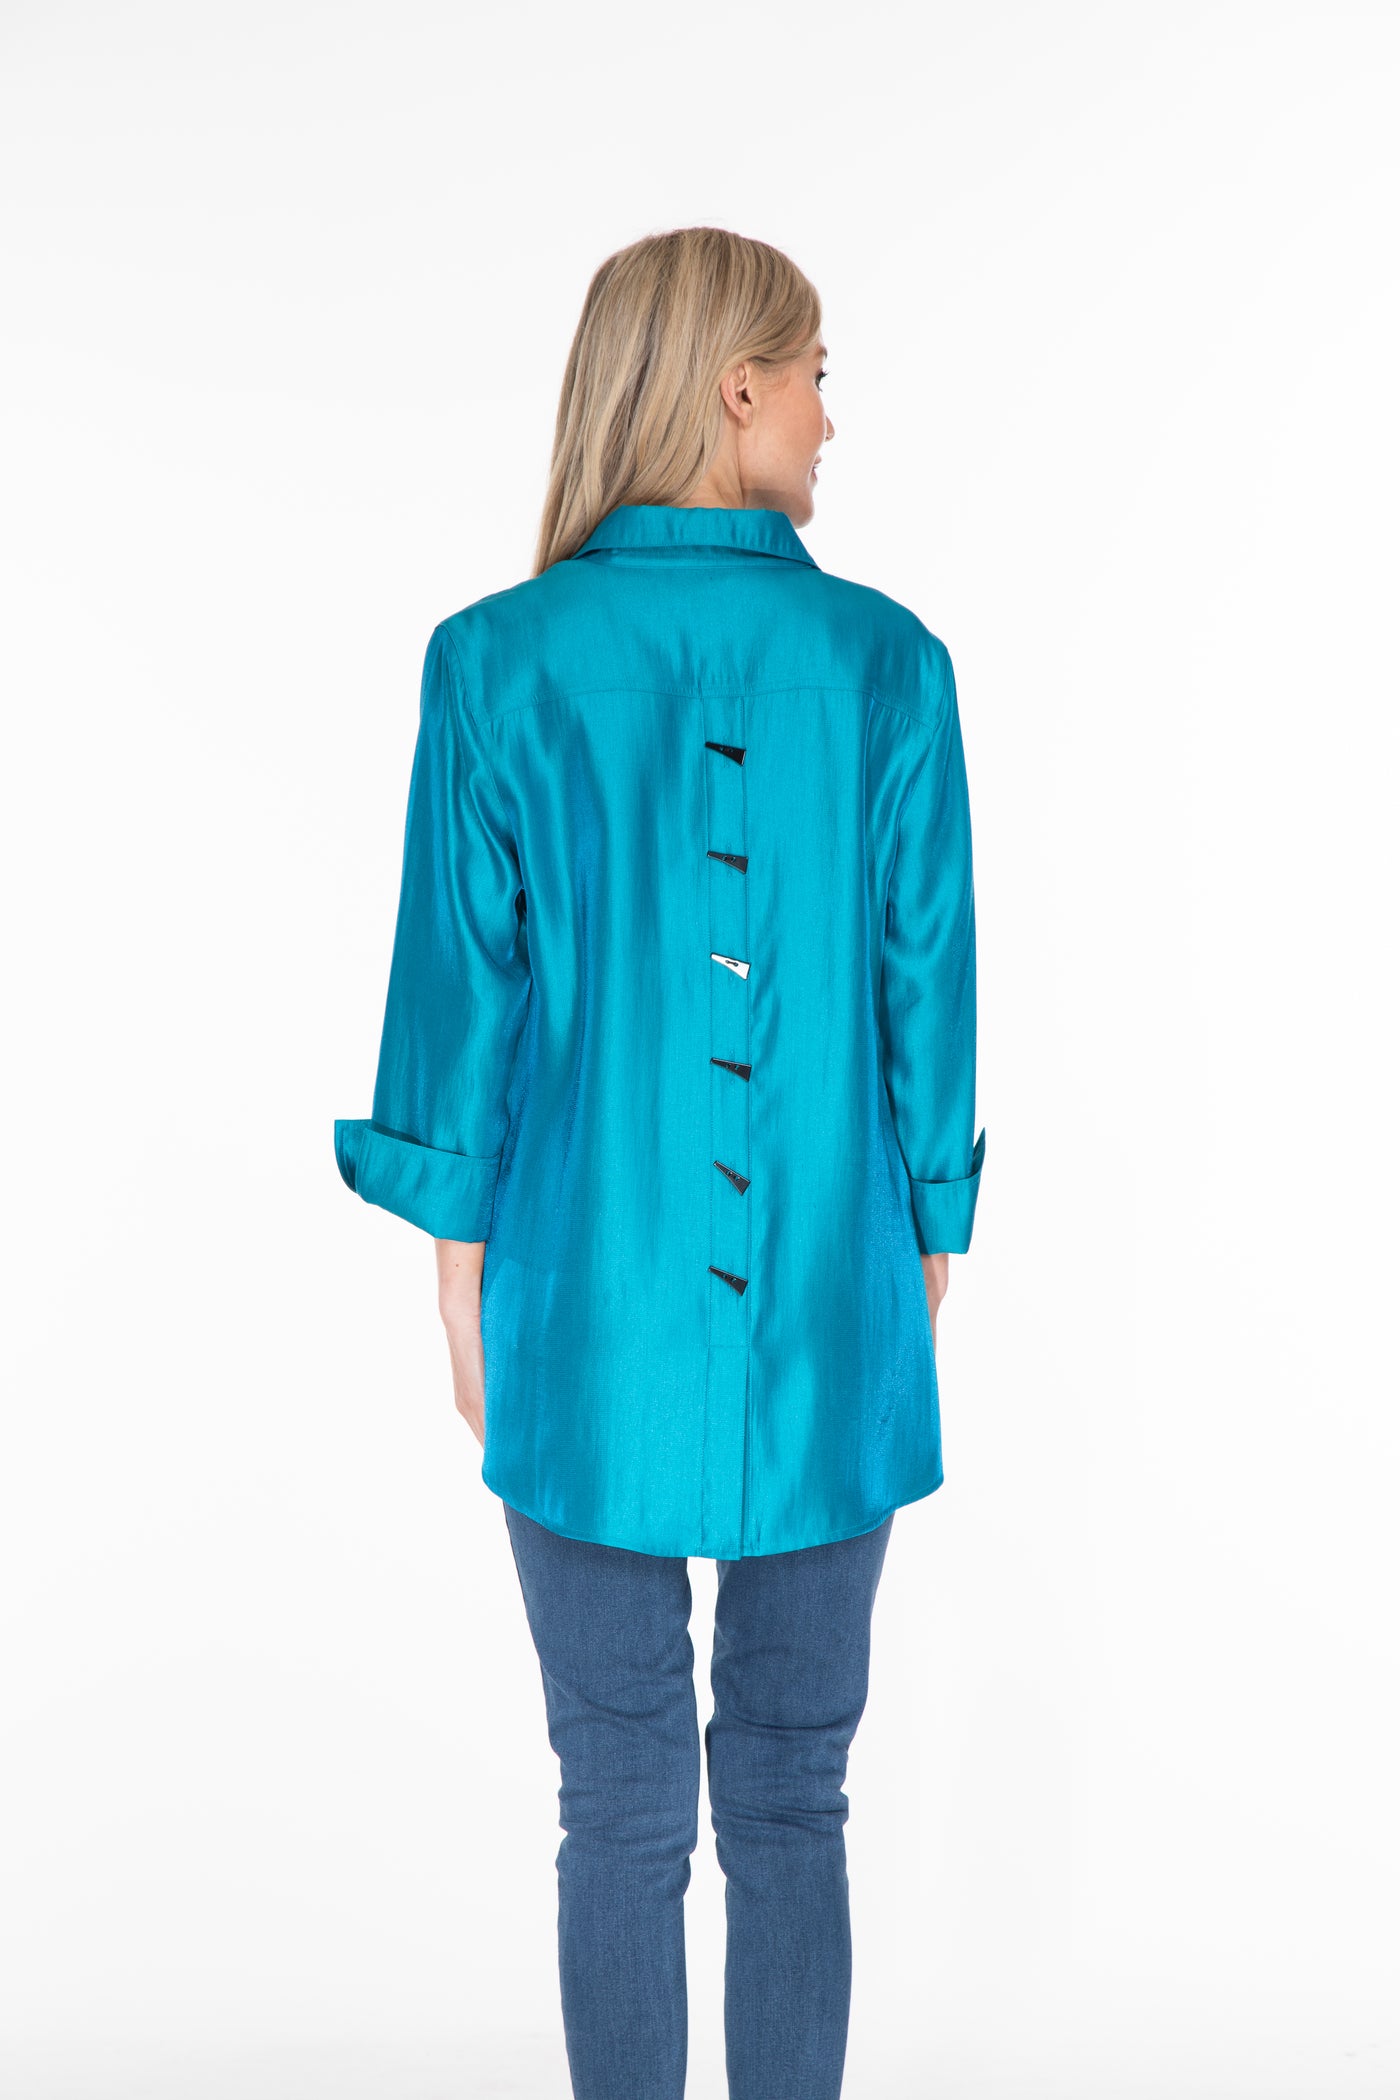 Button Front Shirt - Bright Teal